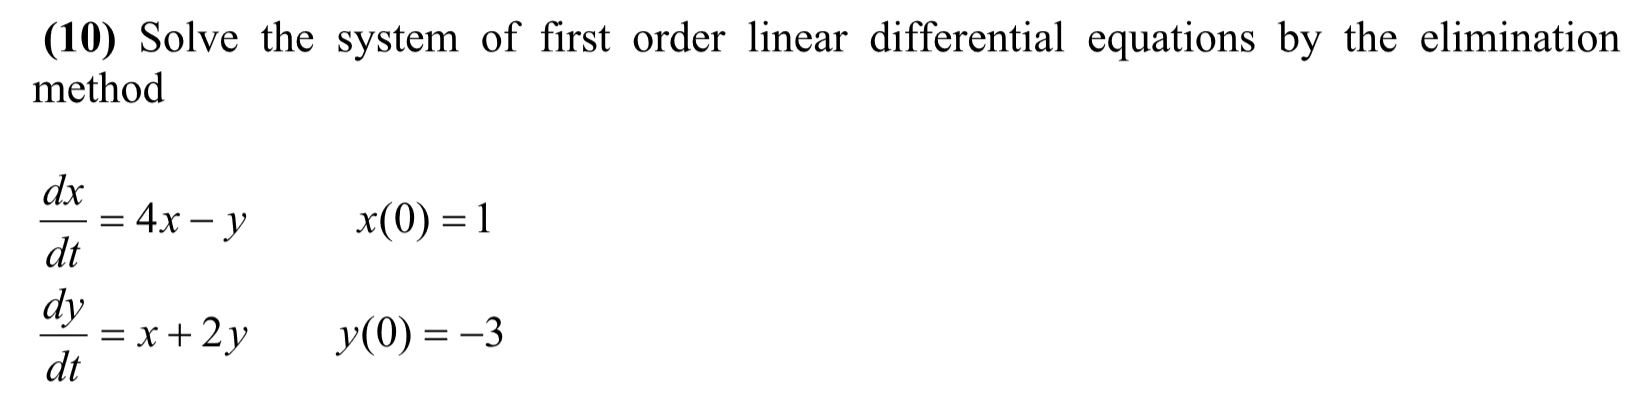 solving linear differential equations of the first order